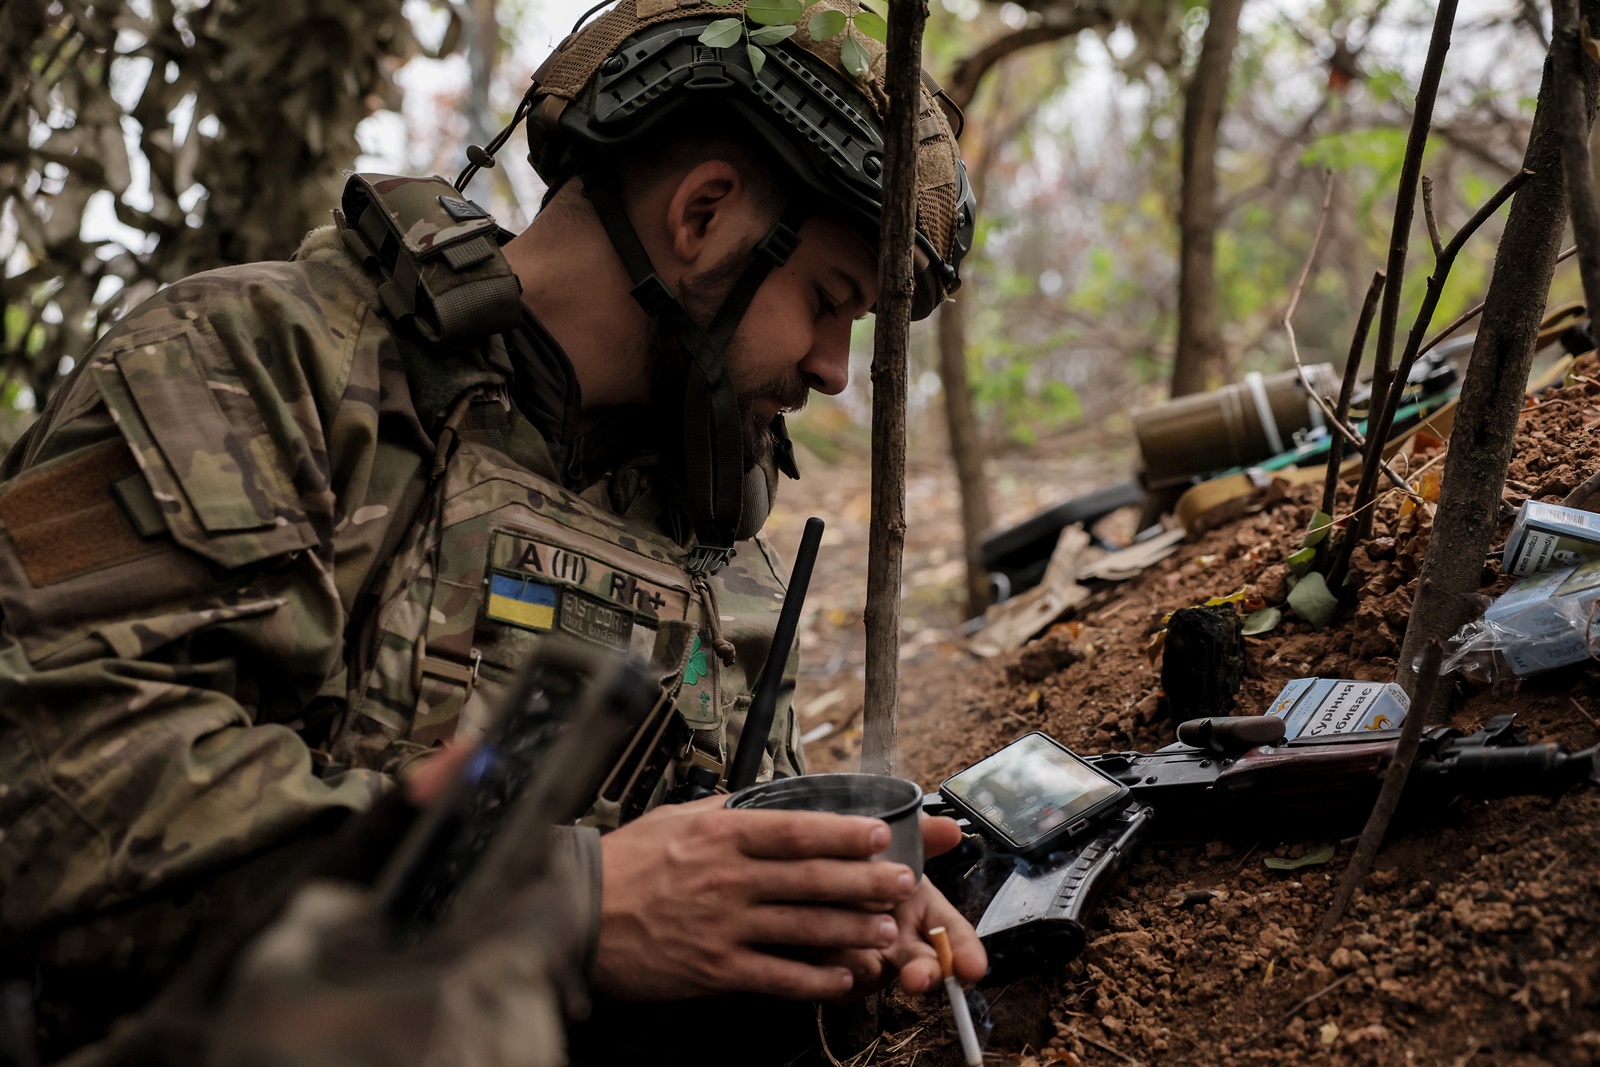 epa10952152 A serviceman of Separate 14th Regiment of Armed Forces of Ukraine, conducts an aerial reconnaissance on positions on the front line in Zaporizhia region, 27 October 2023 (issued 01 November 2023). The FPV (First Person View) drone is a compact device that operates within short distances of 5-20 km. It can transport various types of ammunition capable of destroying vehicles, personnel, and even armored vehicles, proceeding towards the target one-way while carrying the payload. Last year saw an escalation in the use of FPV (first person view) drones in the Russian war in Ukraine. Drones have become an economical and effective weapon that can save the lives of personnel during an attack or active defense by providing the ability to operate from protected positions. A single drone, that costs less than 1000 euros, can effectively destroy military vehicles and achieve closed targets. The production of these simple drones is straightforward, making them economical and widely available.  EPA/OLEG PETRASYUK  ATTENTION: This Image is part of a PHOTO SET